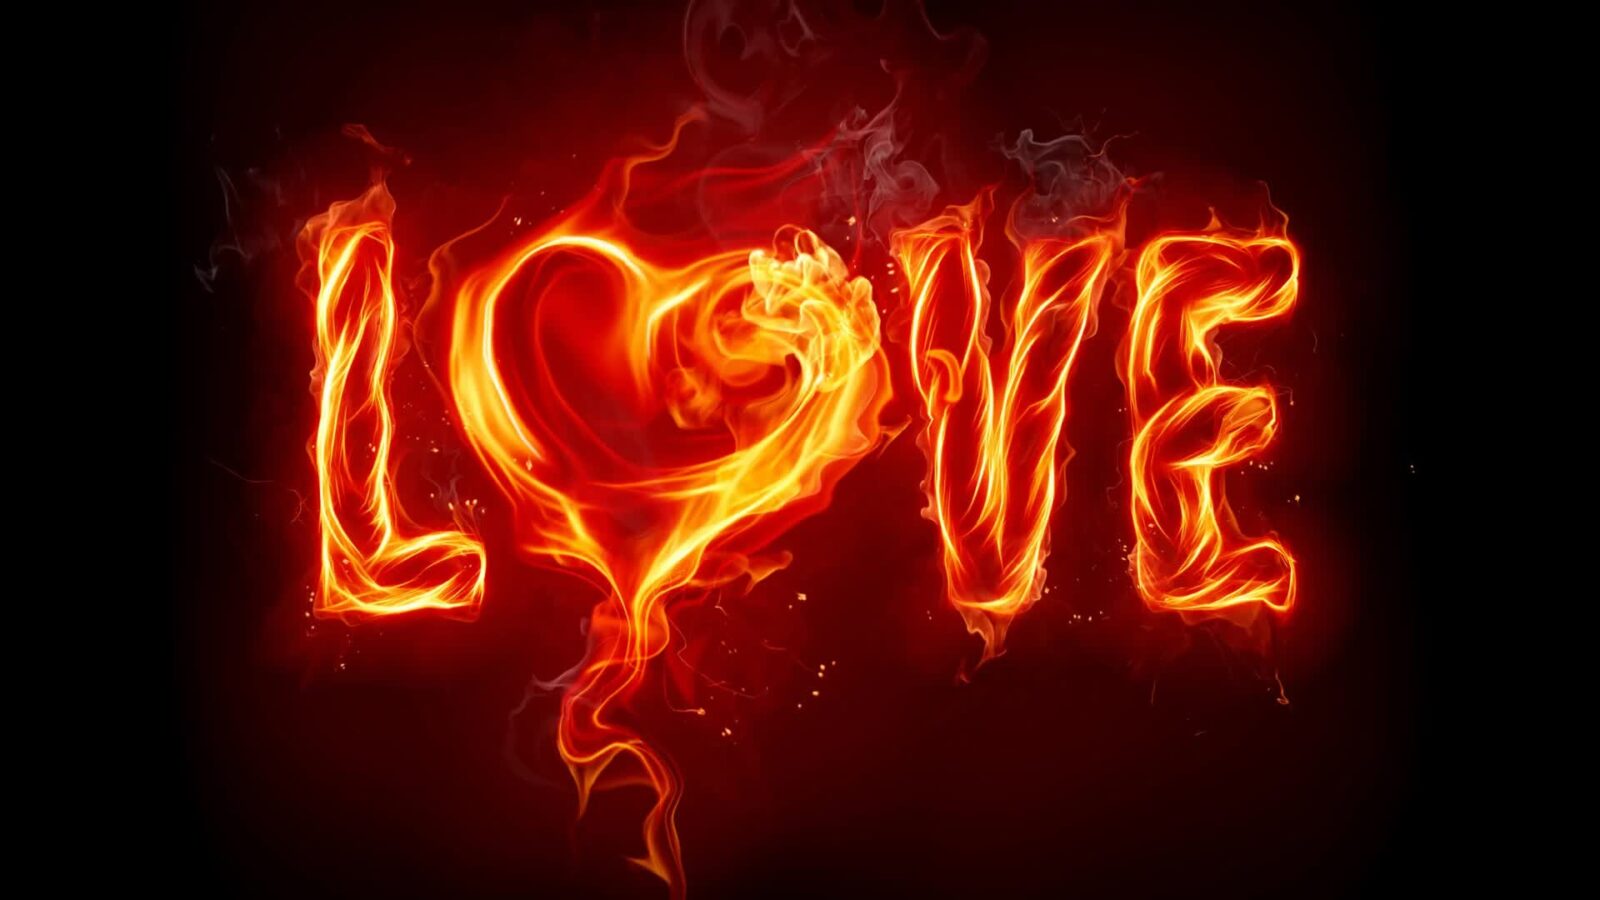 LiveWallpapers4Free.com | Love In Fire Abstract - Free Live Wallpaper